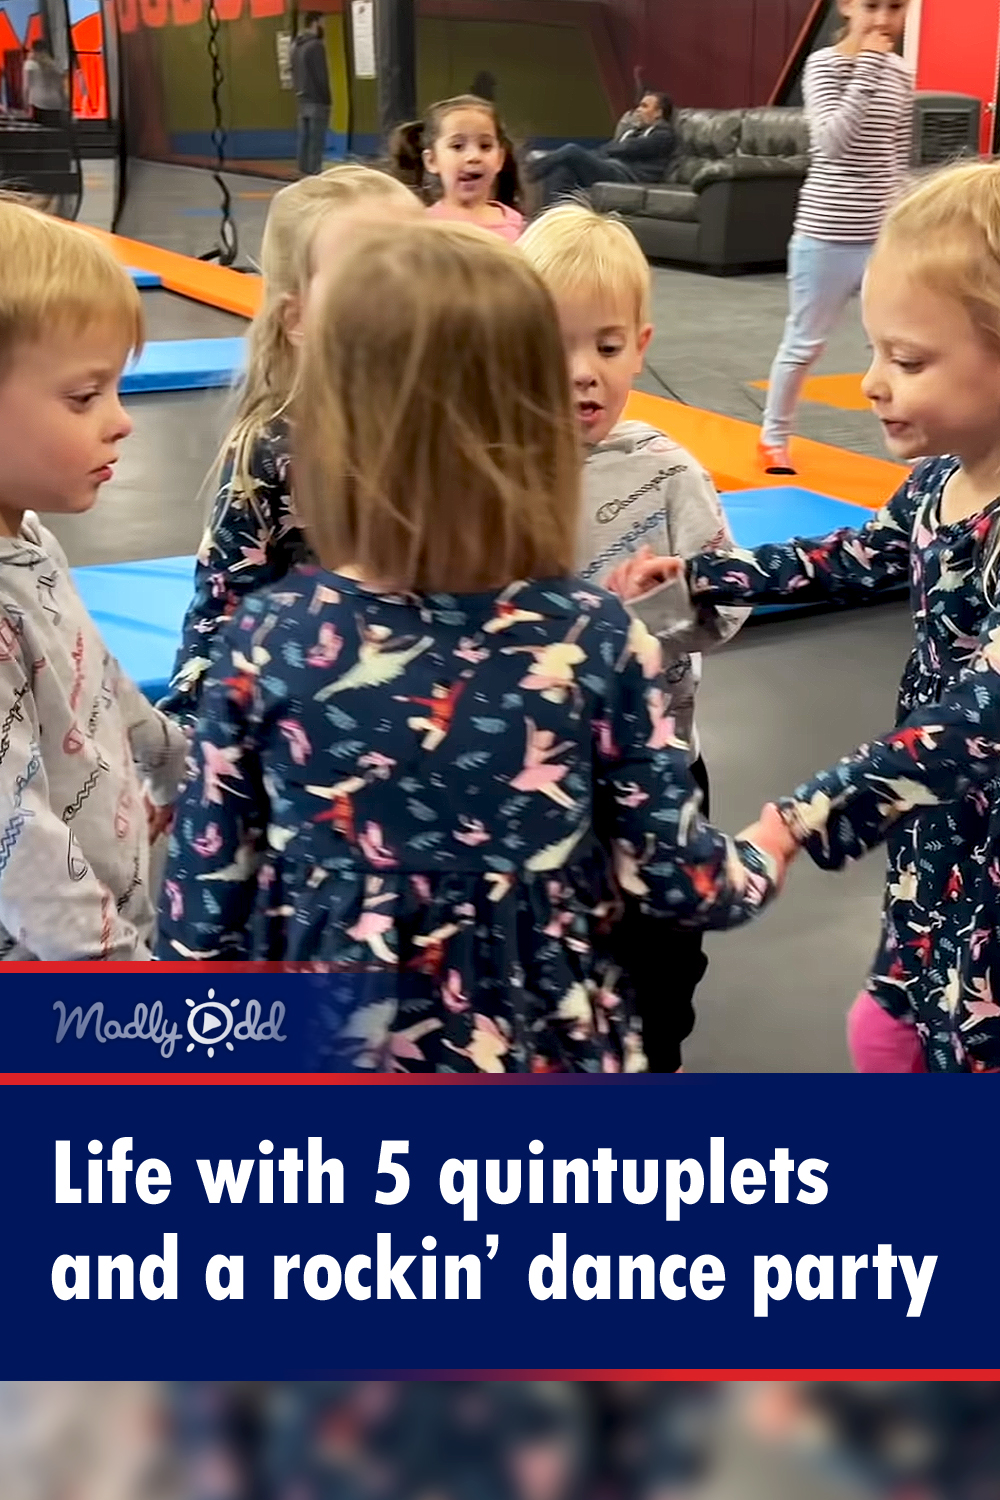 Life with 5 quintuplets and a rockin’ dance party